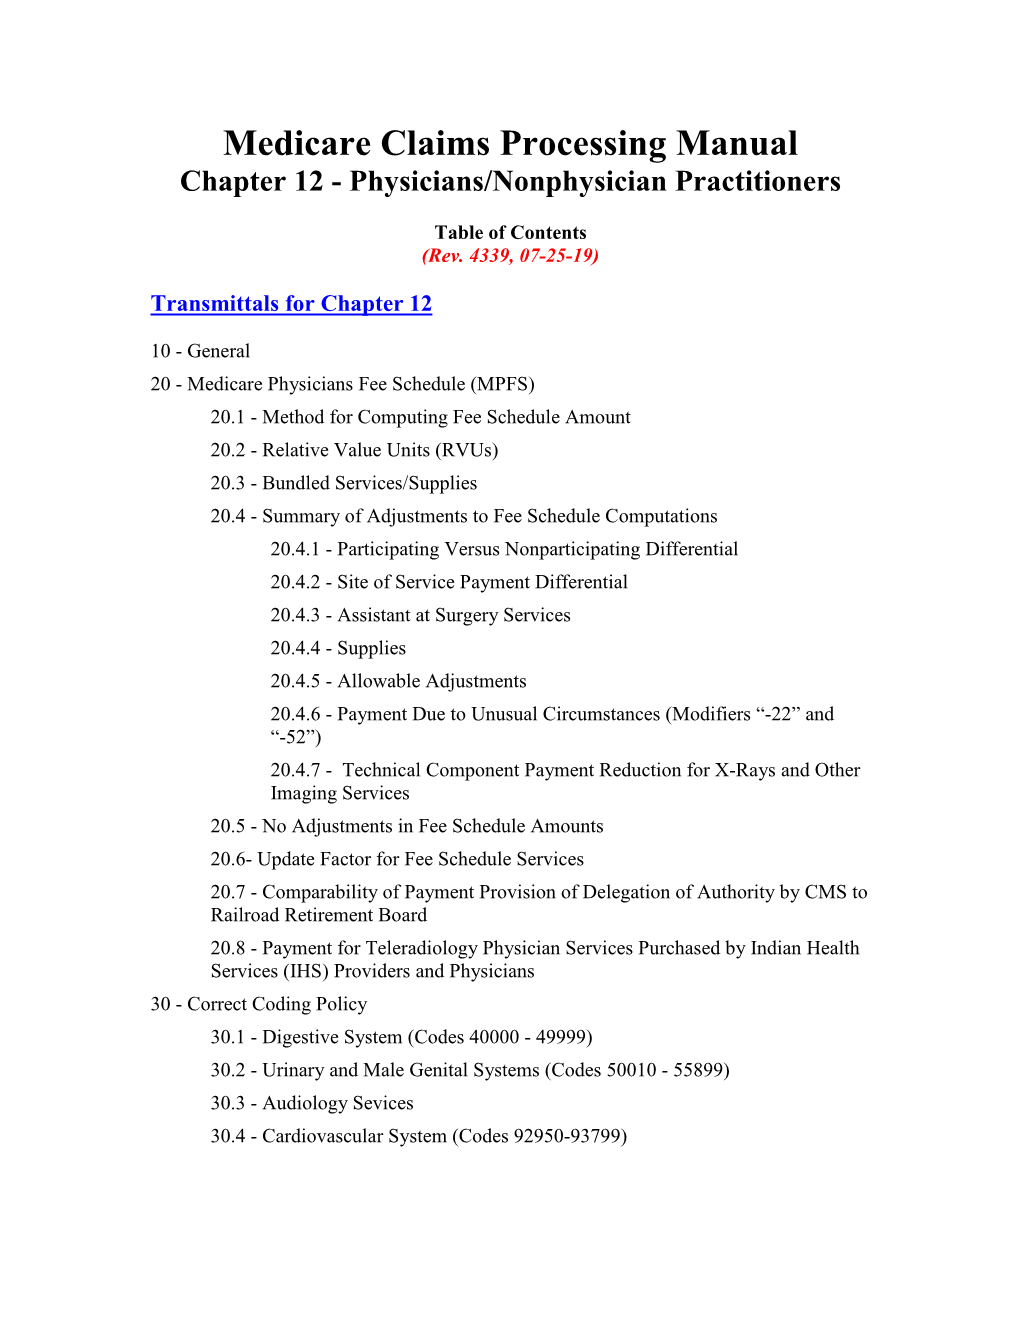 Medicare Claims Processing Manual Chapter 12 - Physicians/Nonphysician Practitioners